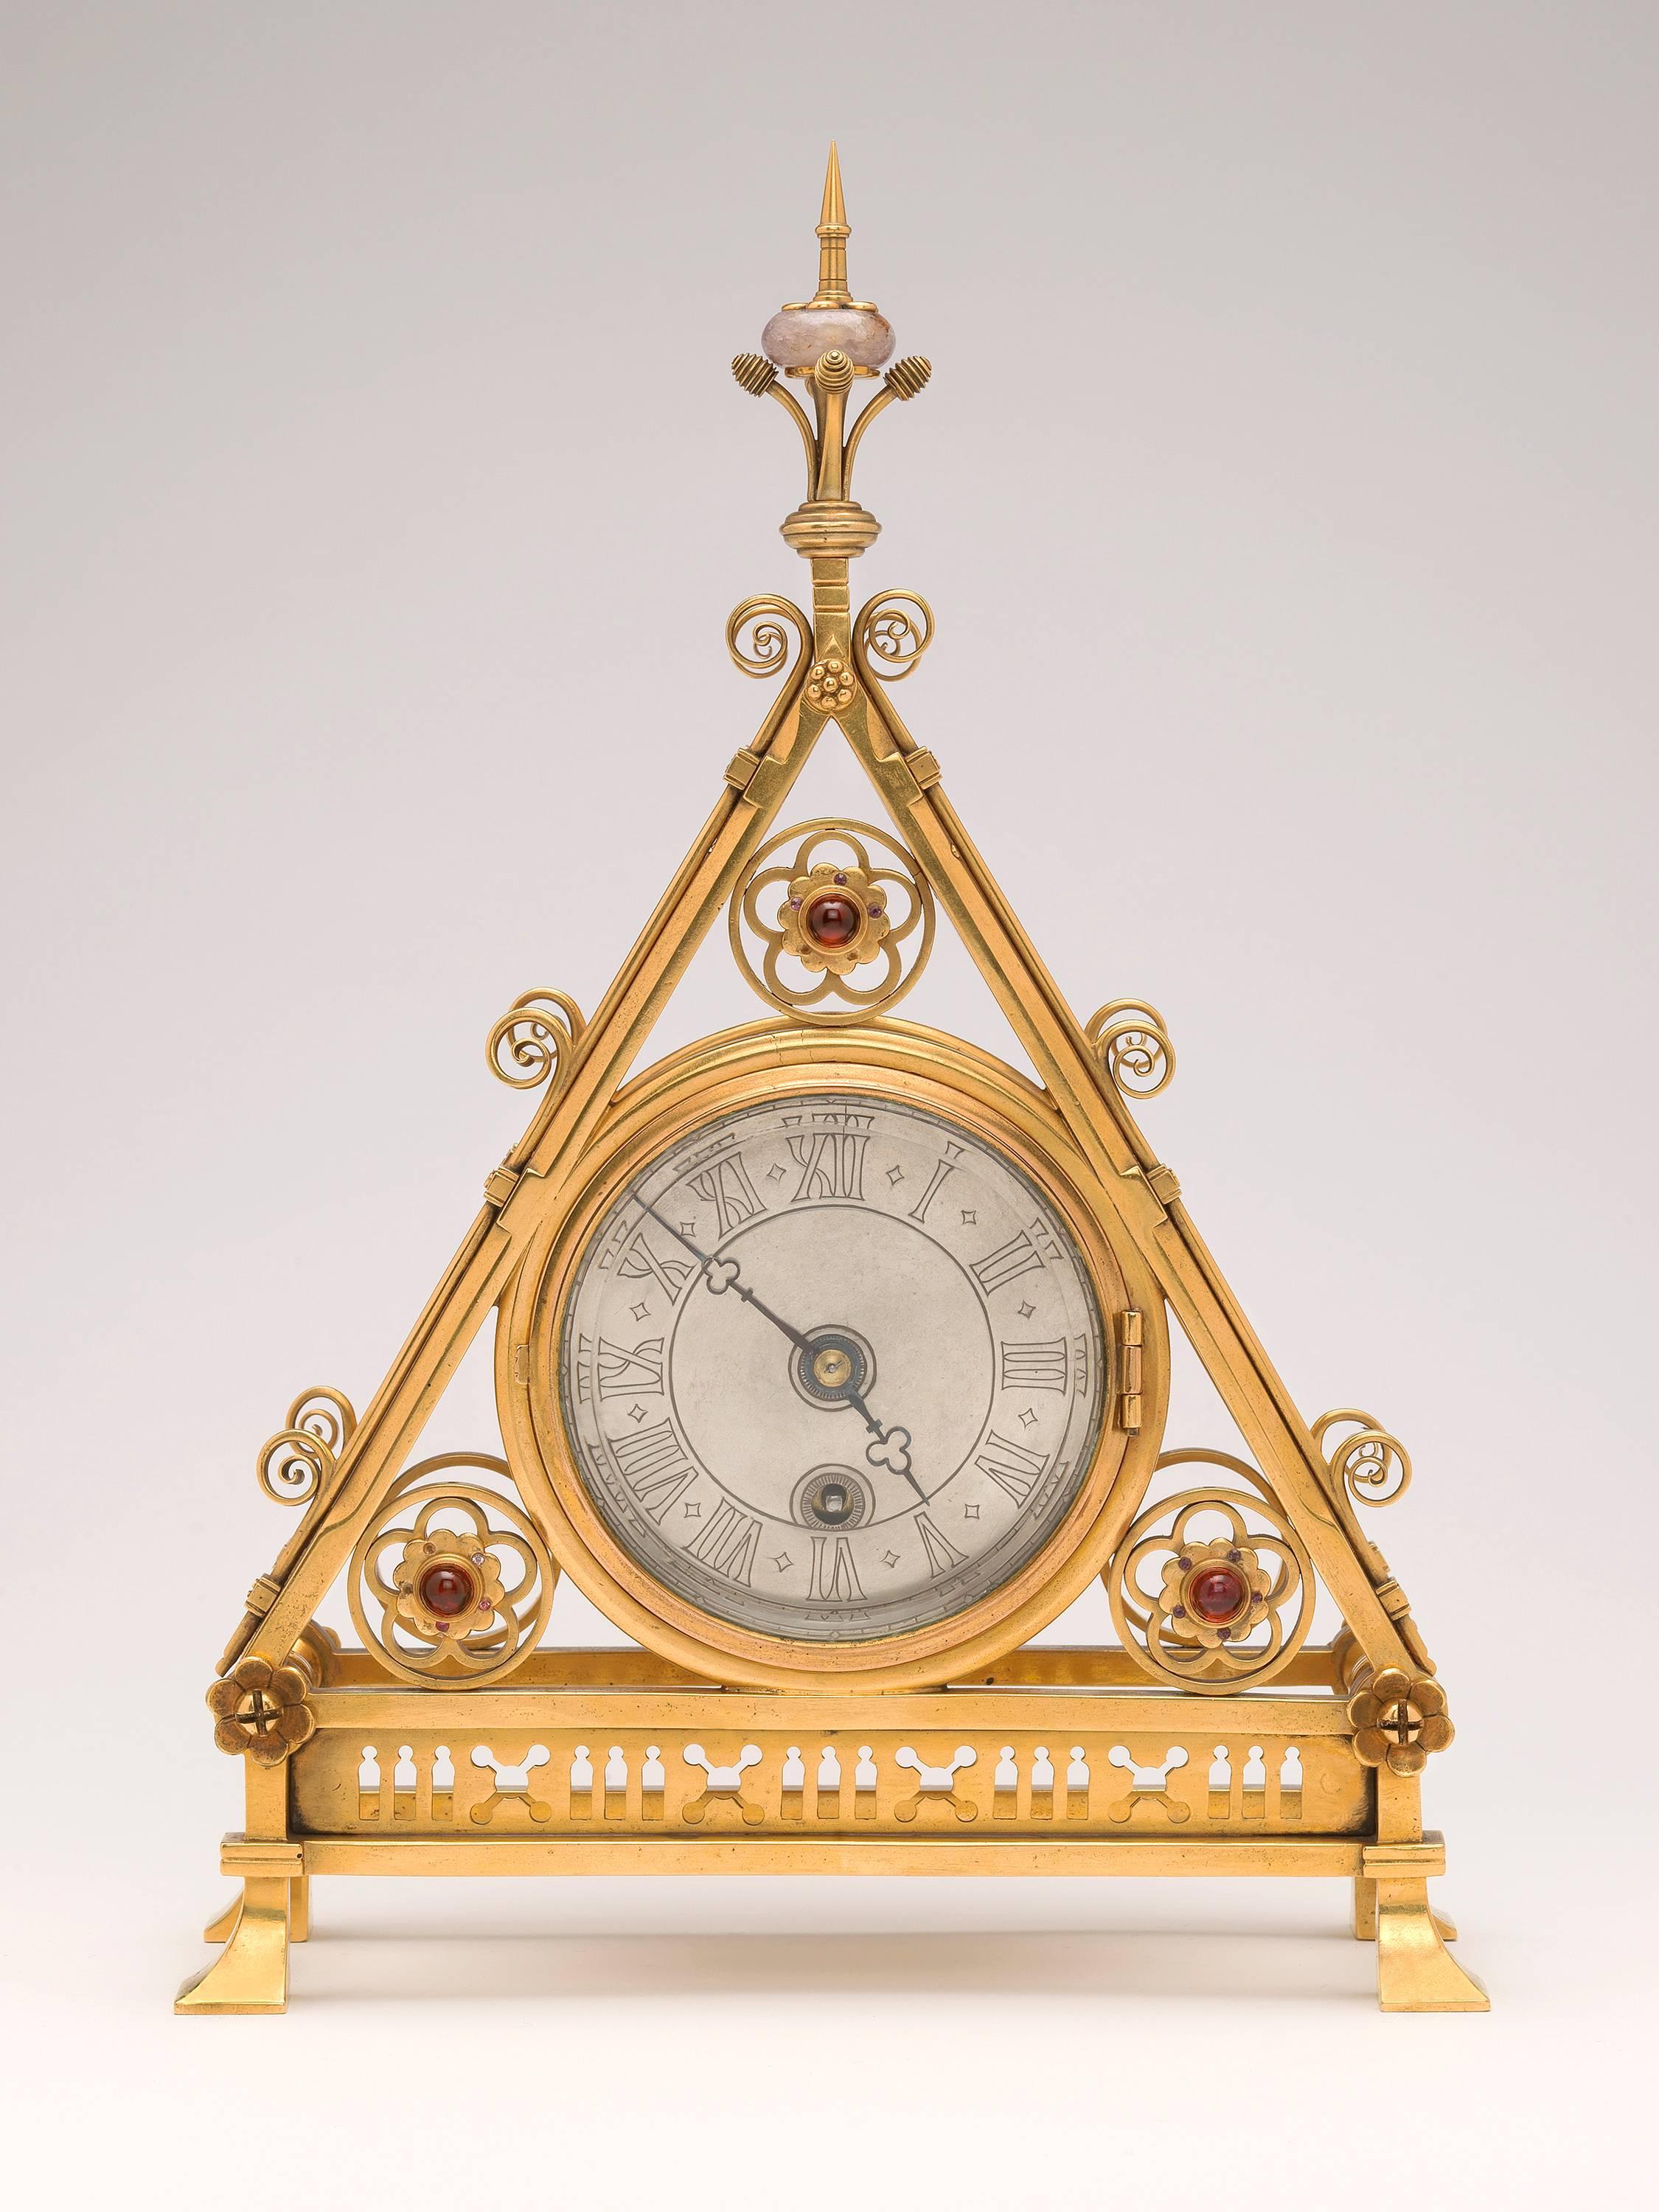 This particularly fine gothic architectural model, retains its original face and hands. The finial is mounted with Derbyshire Blue John. The dial is surrounded by three roundels of cinquefoil design, the centres are mounted with red cabochon glass.